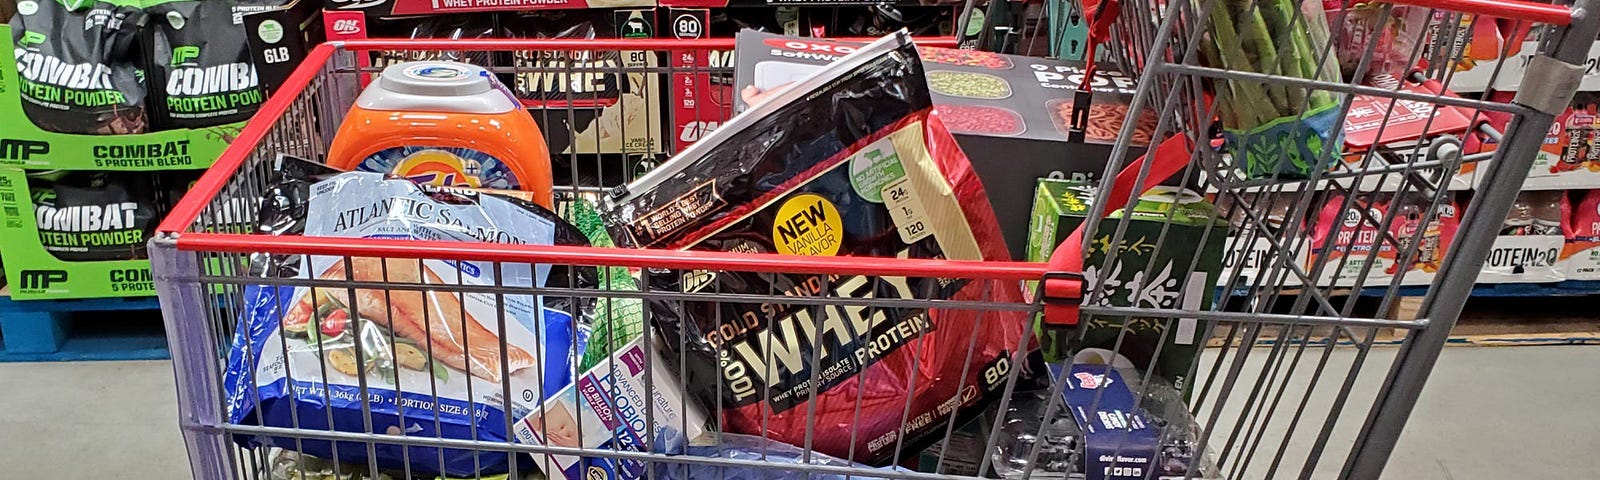 A Costco shopping cart filled with items.